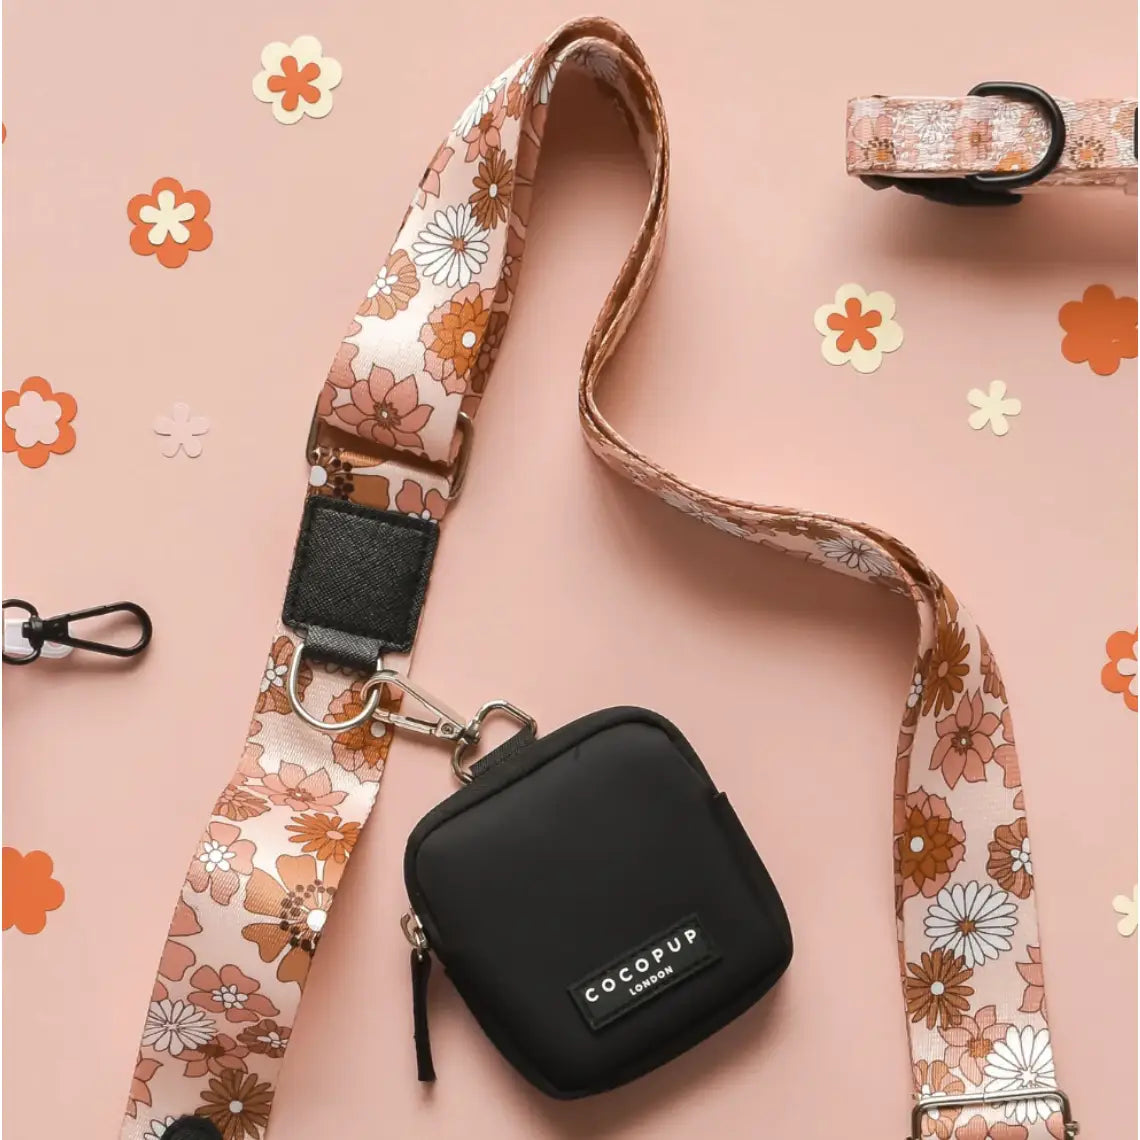 Cocopup London - Bag Strap - Groovy Floral